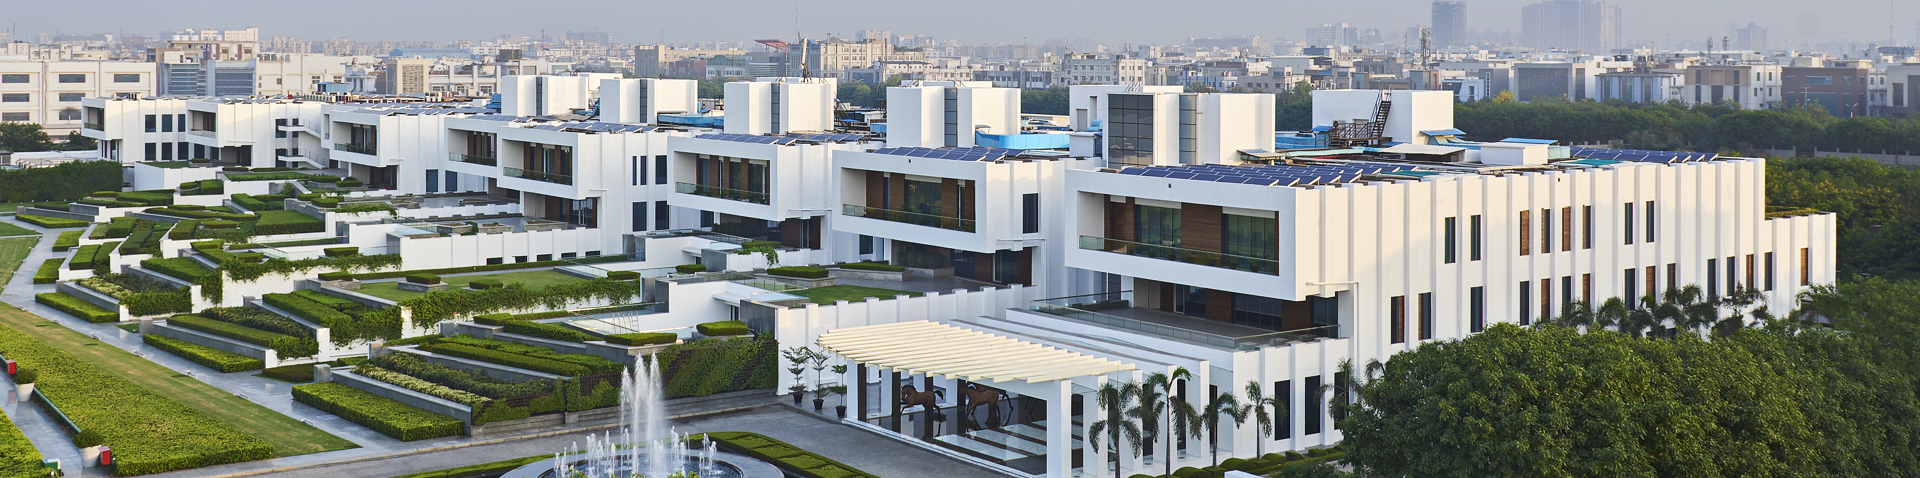 The Dharampal Satyapal Group executes large retrofit project with NOVENCO ZerAx fans